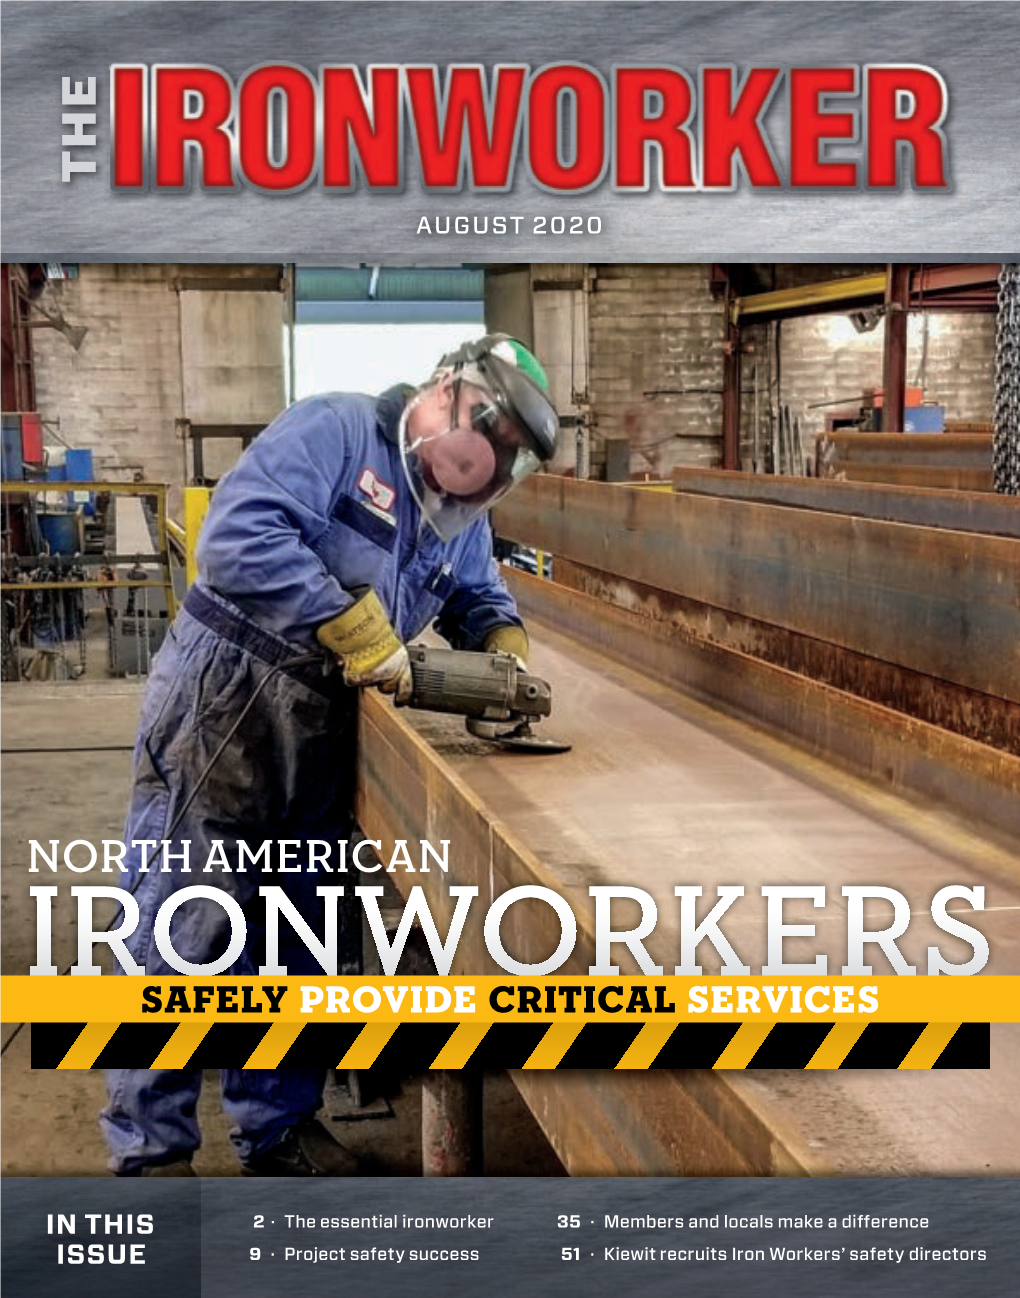 NORTH AMERICAN IRONWORKERS Safely Provide Critical Services